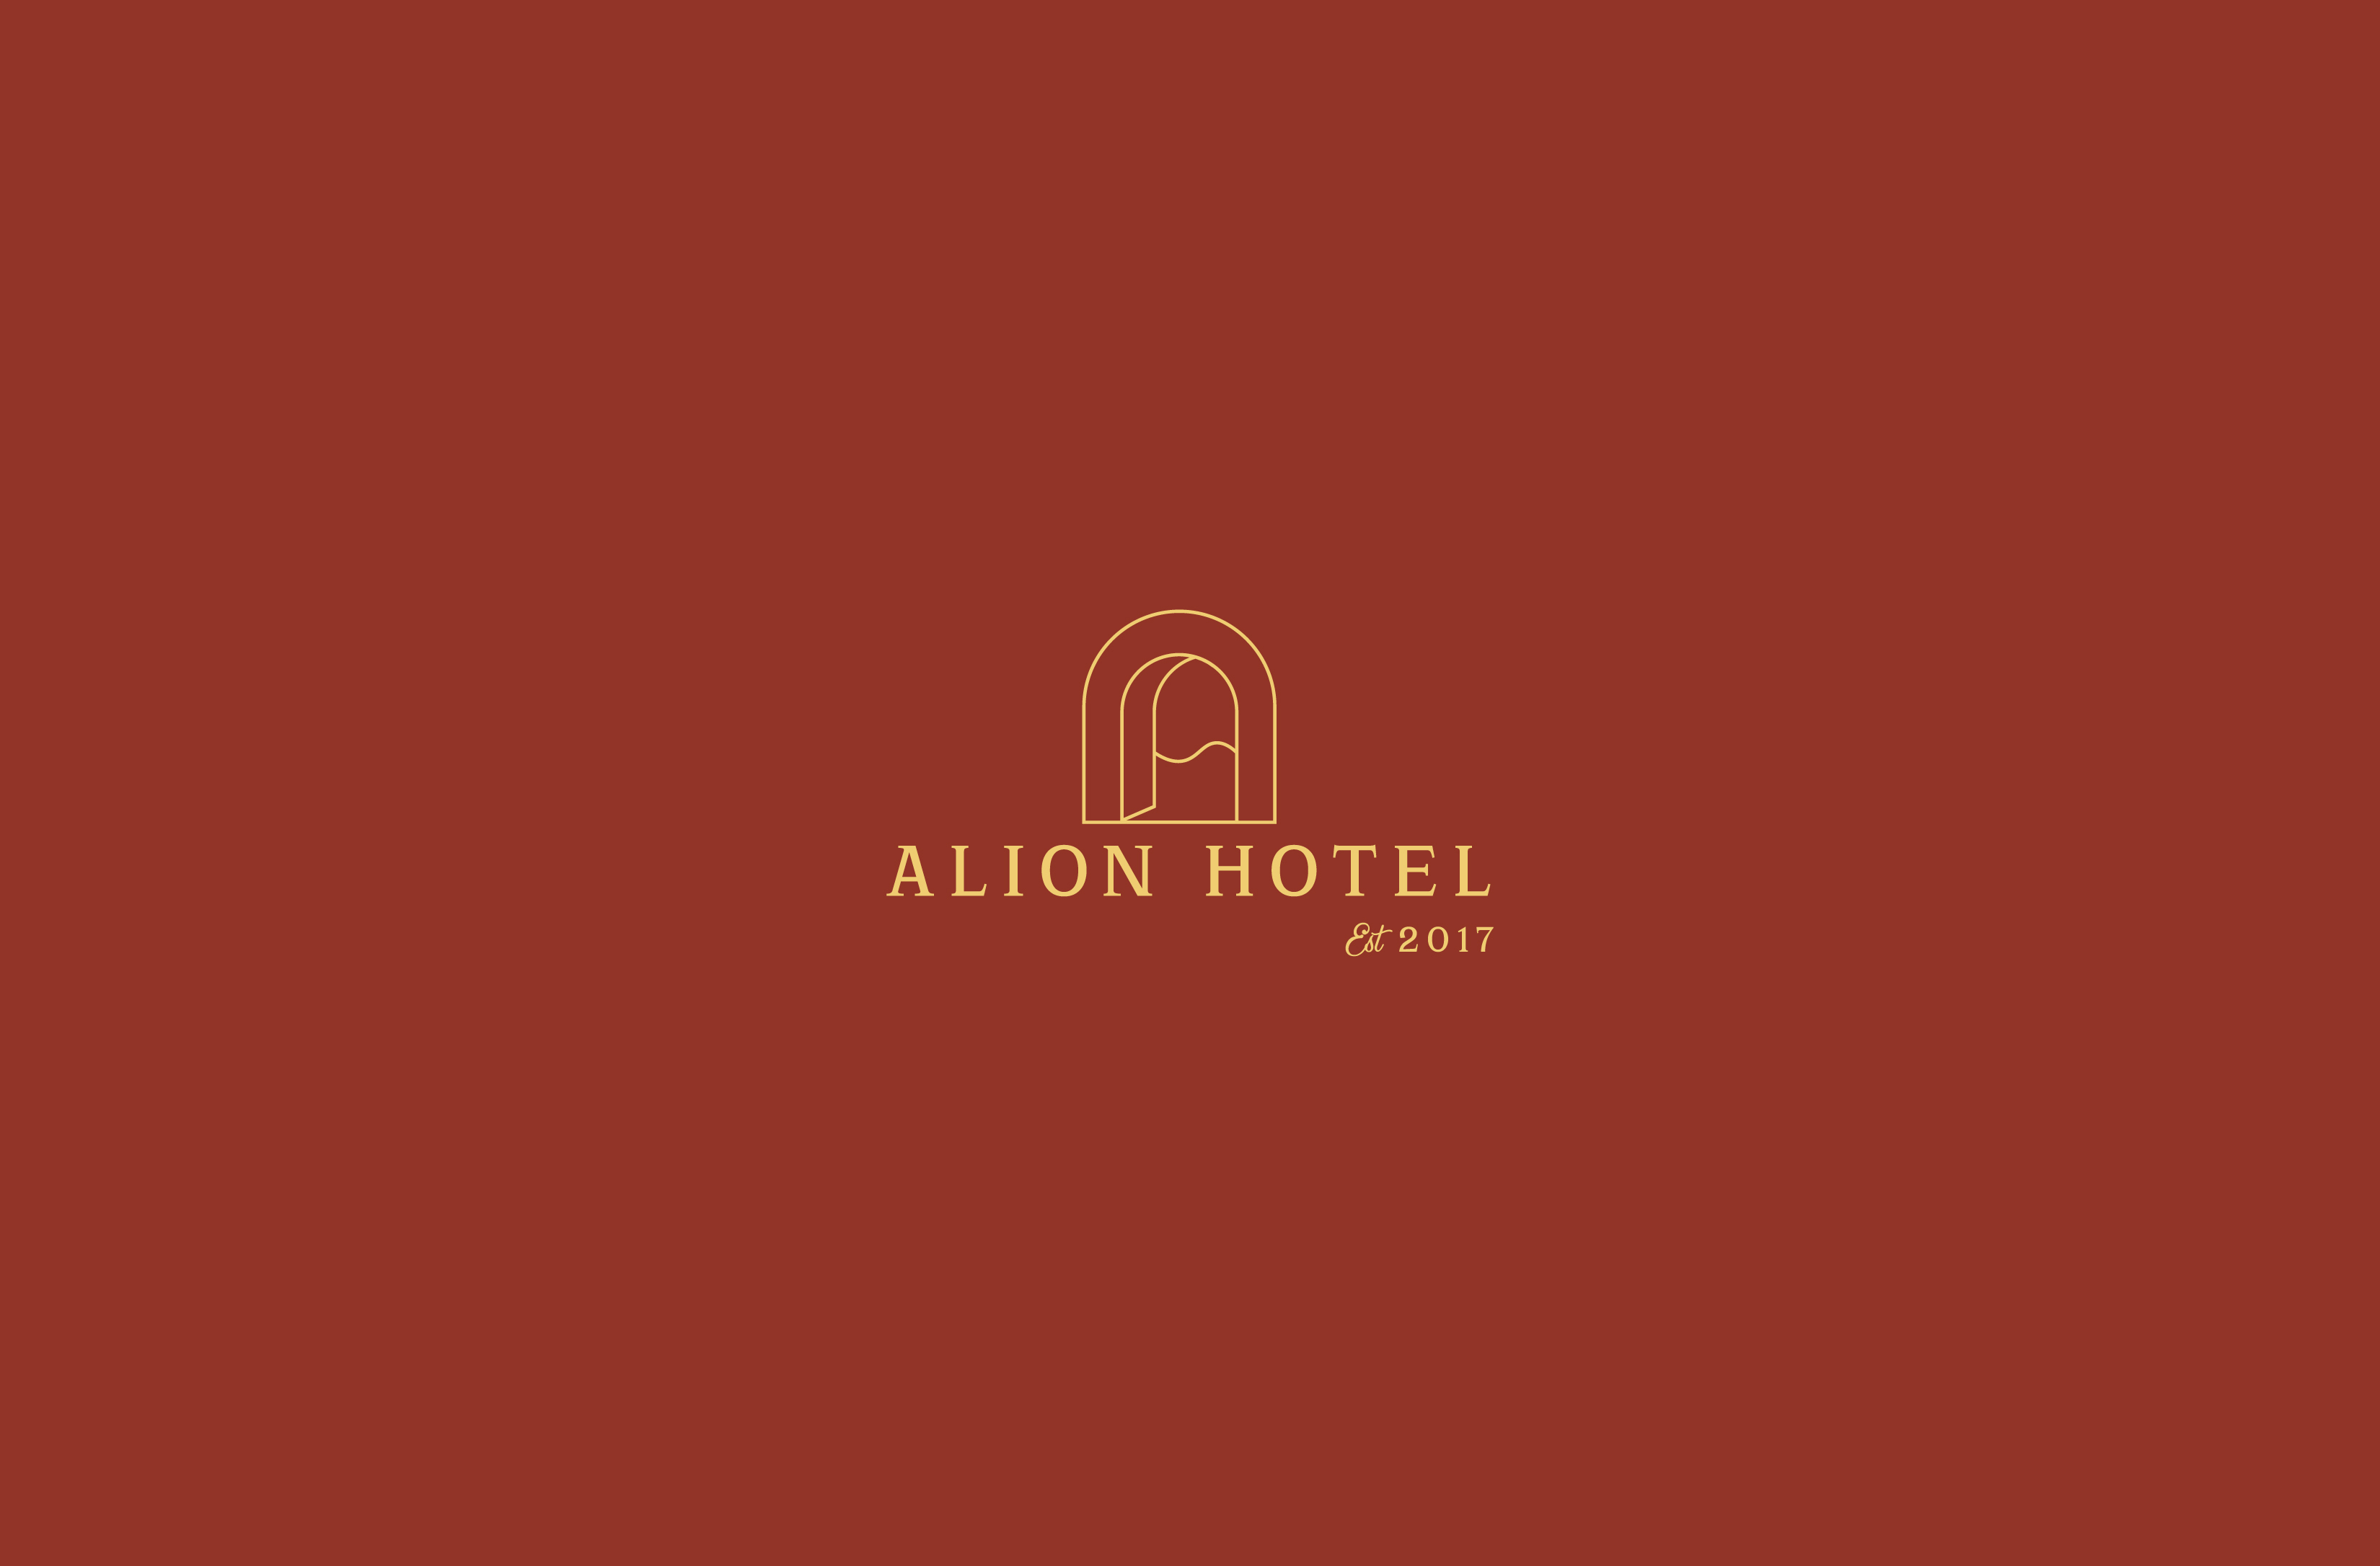 Alion Hotel: A Symbolic Oasis in the Heart of the City